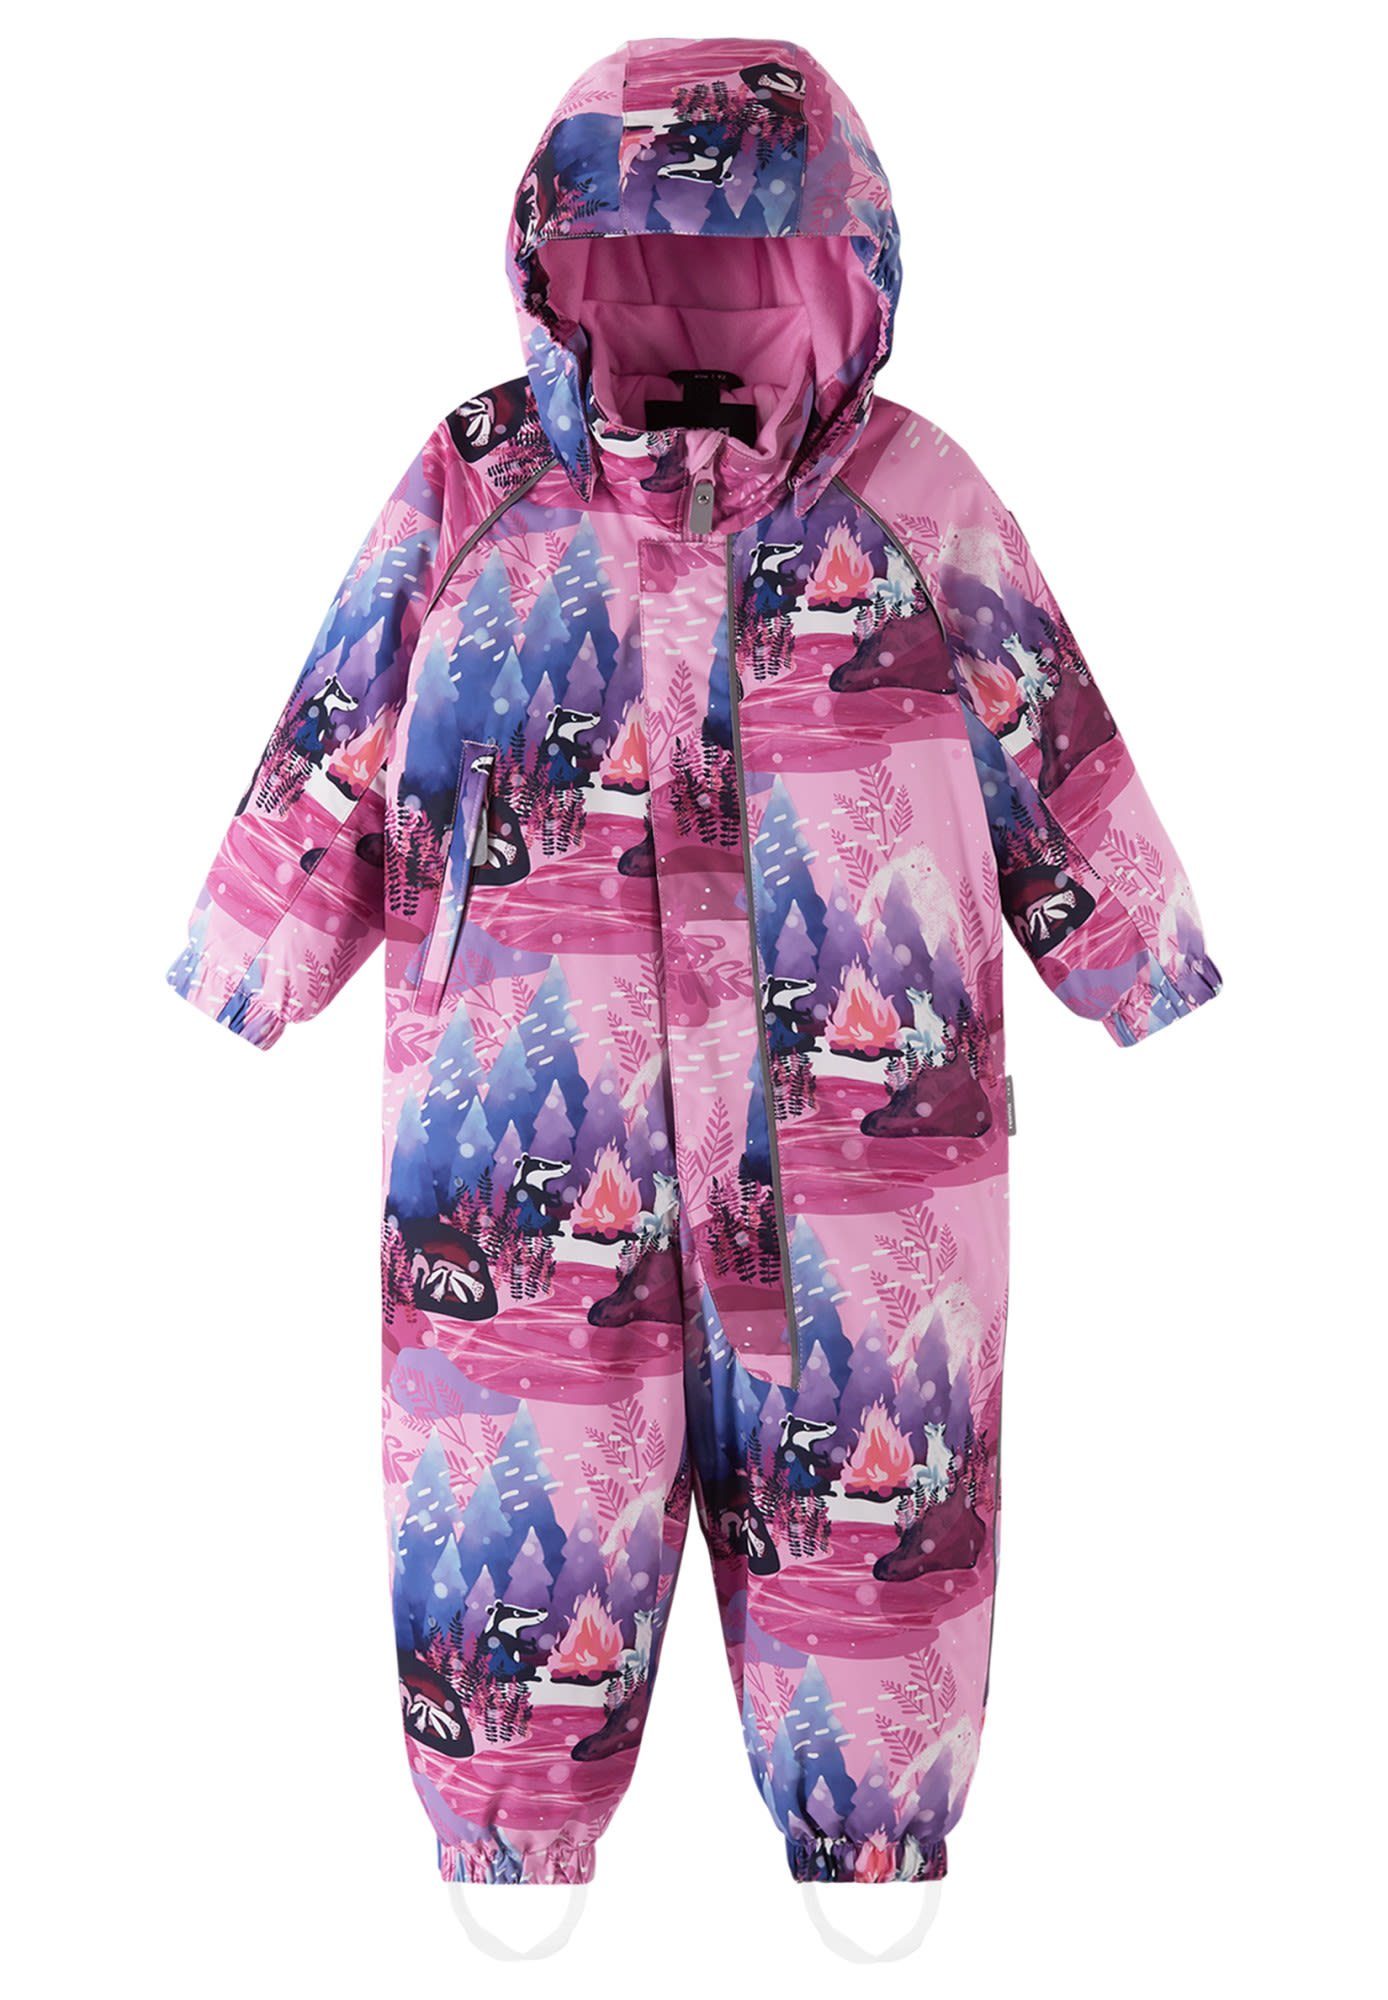 reima Overall Reima Classic Pink Kinder Langnes Toddlers Overall Winter